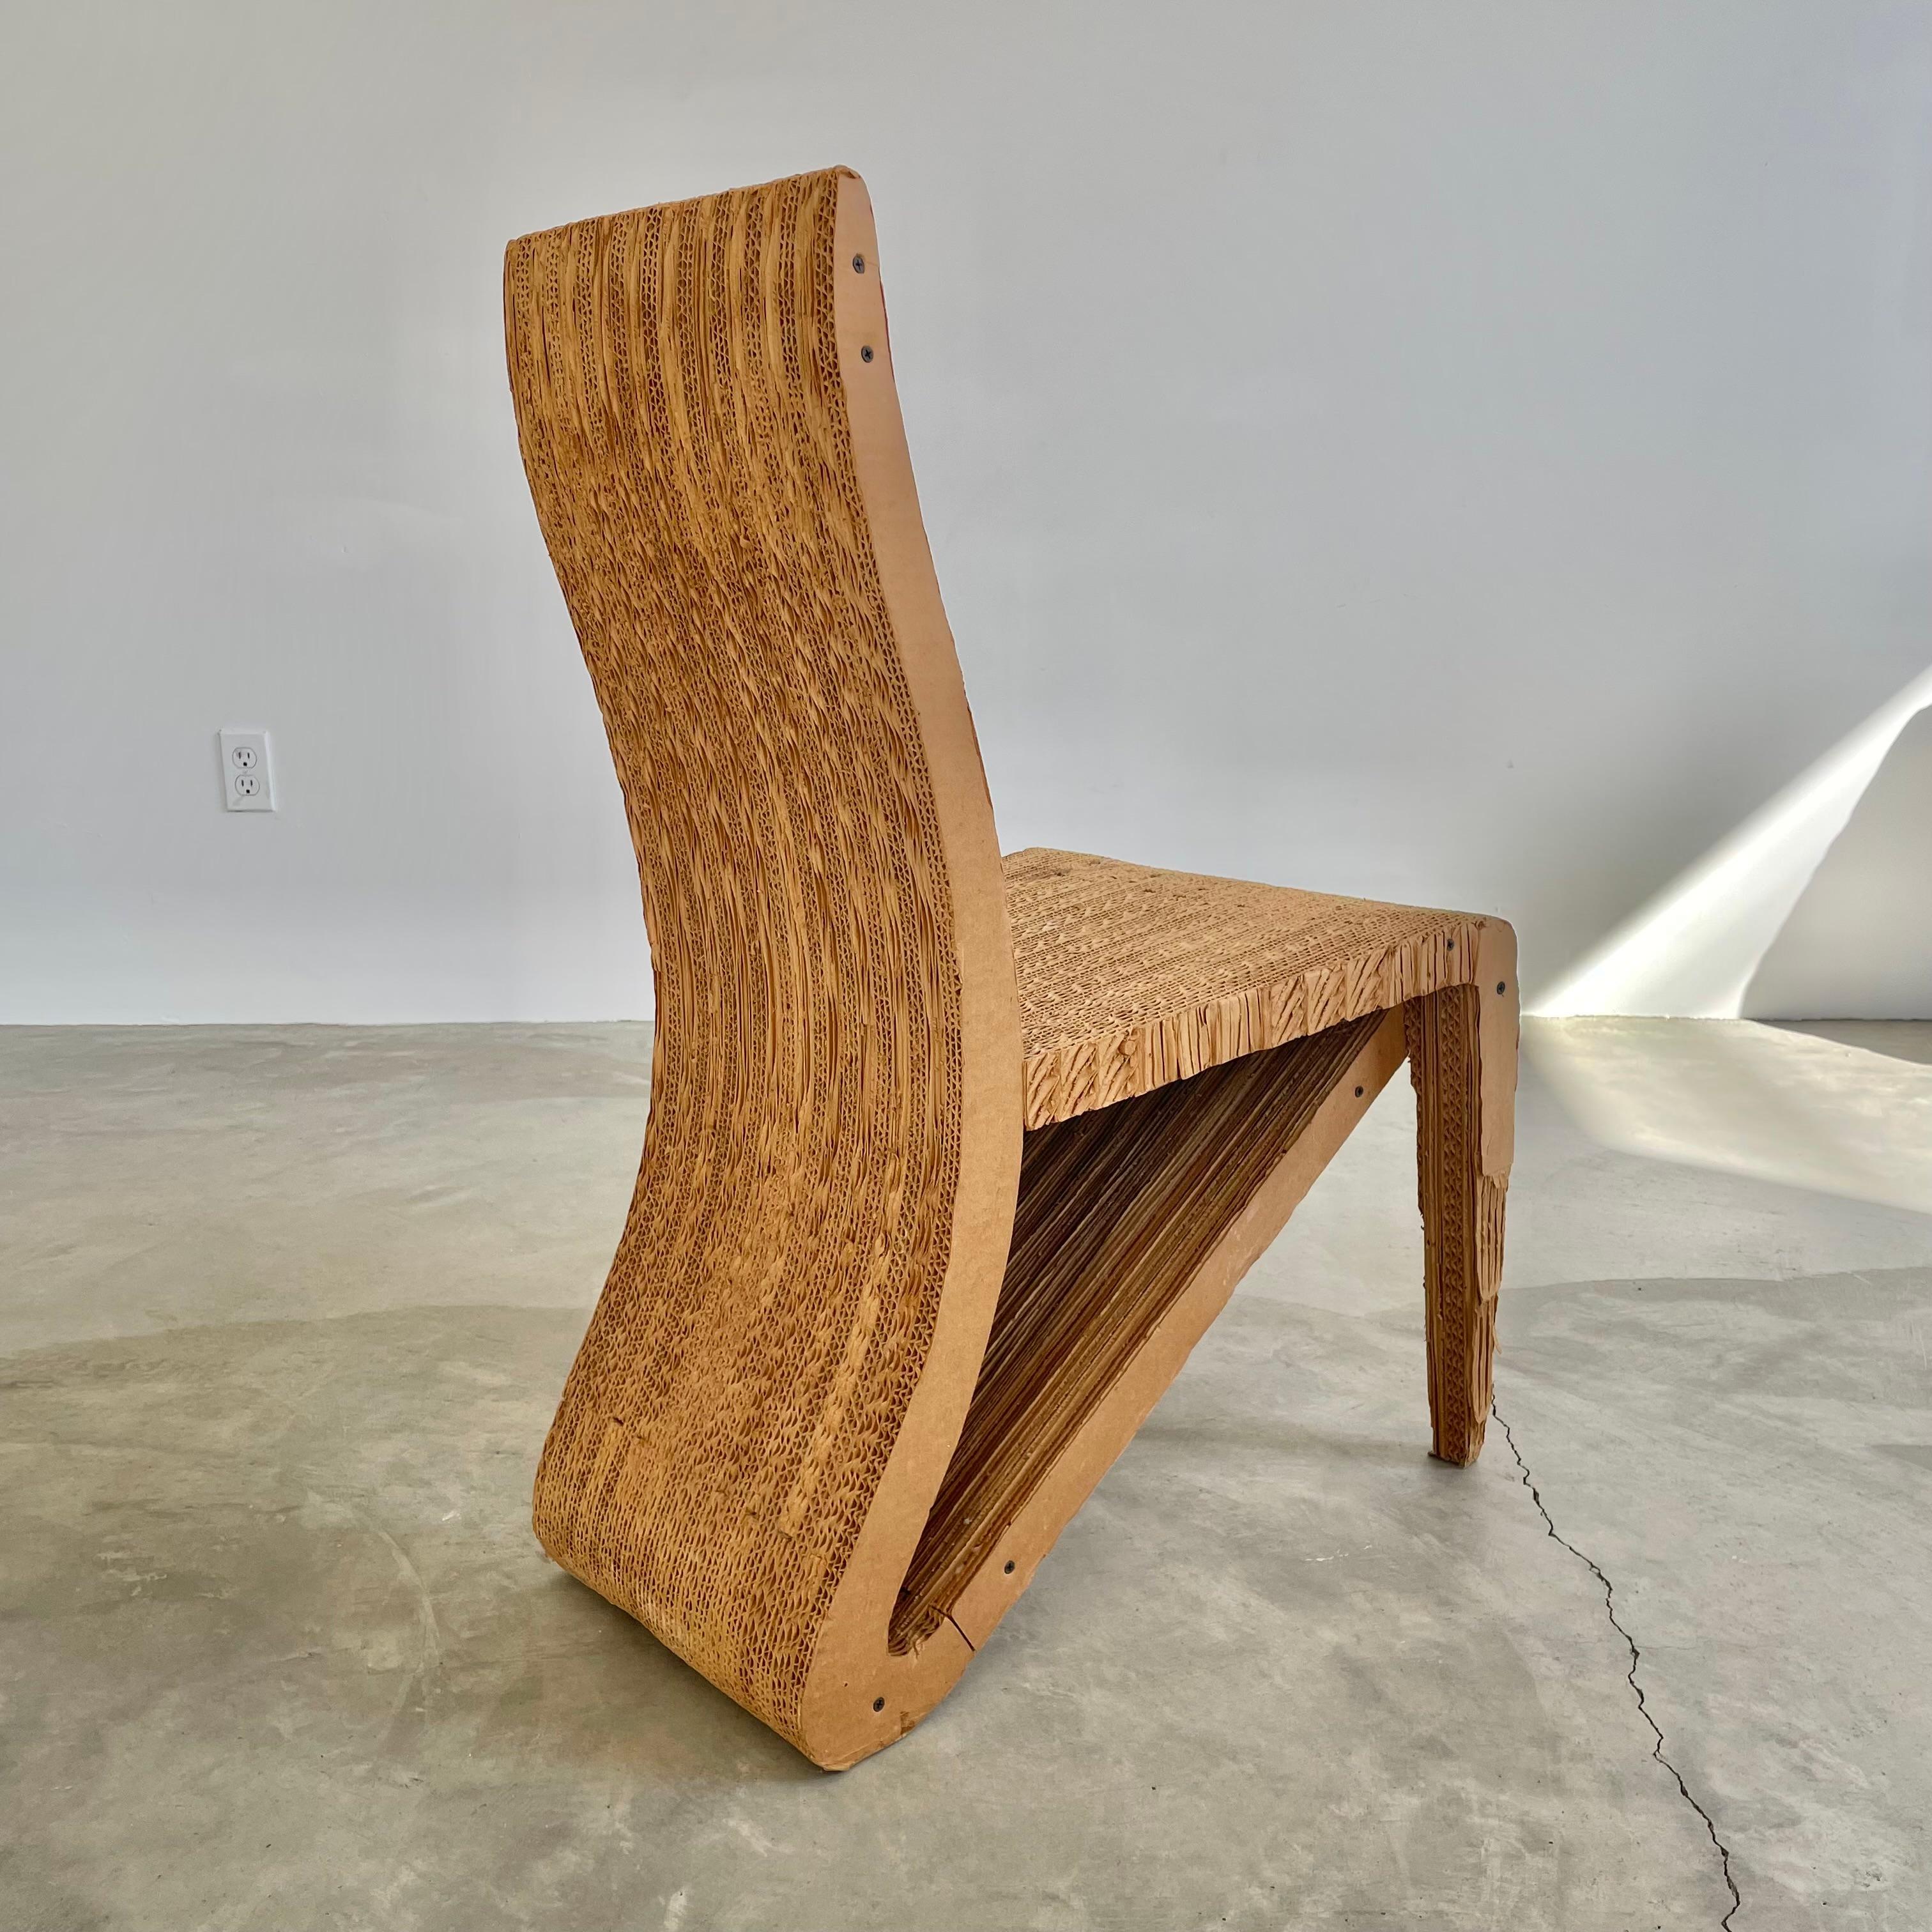 Extremely rare cardboard prototype chair for Frank Gehry from the estate of Margot Alofsin, an architect of Gehry Partners. Corrugated cardboard chair with two slender front legs and a wide loop rear base that is one solid shape with the rest of the